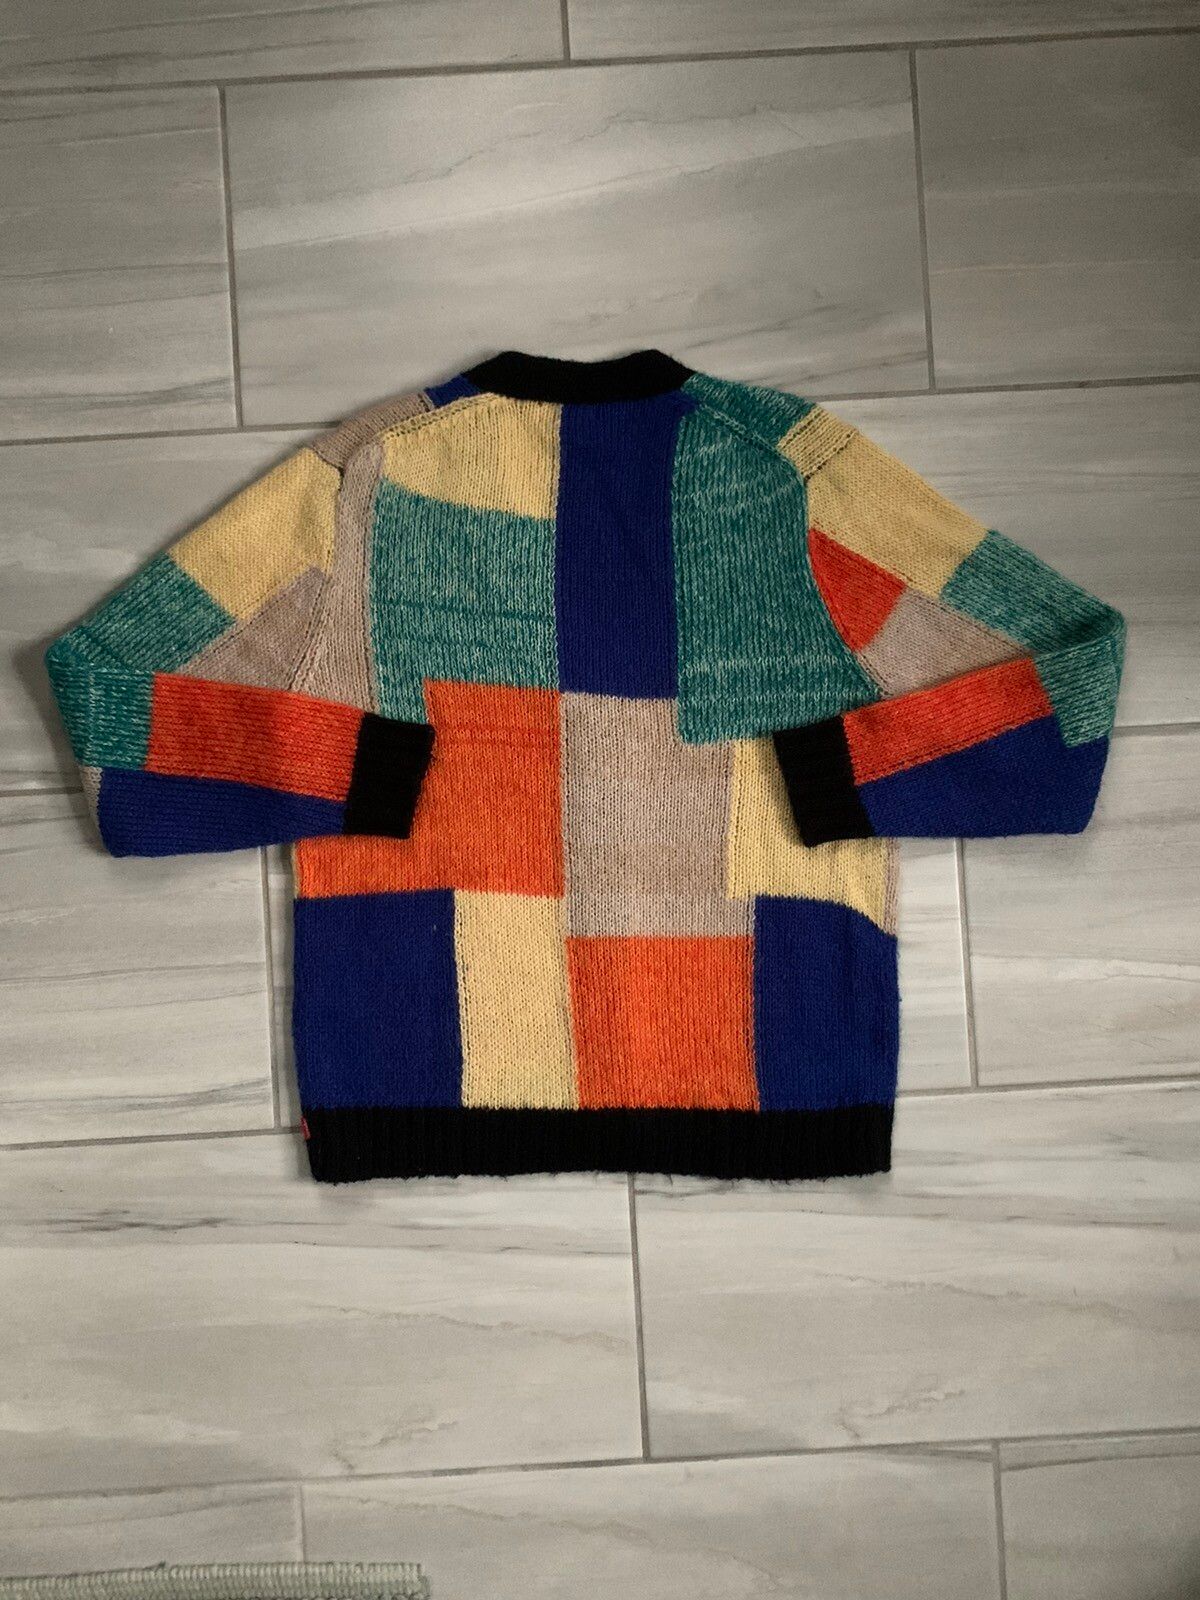 Supreme SS19 PATCHWORK MOHAIR CARDIGAN | Grailed